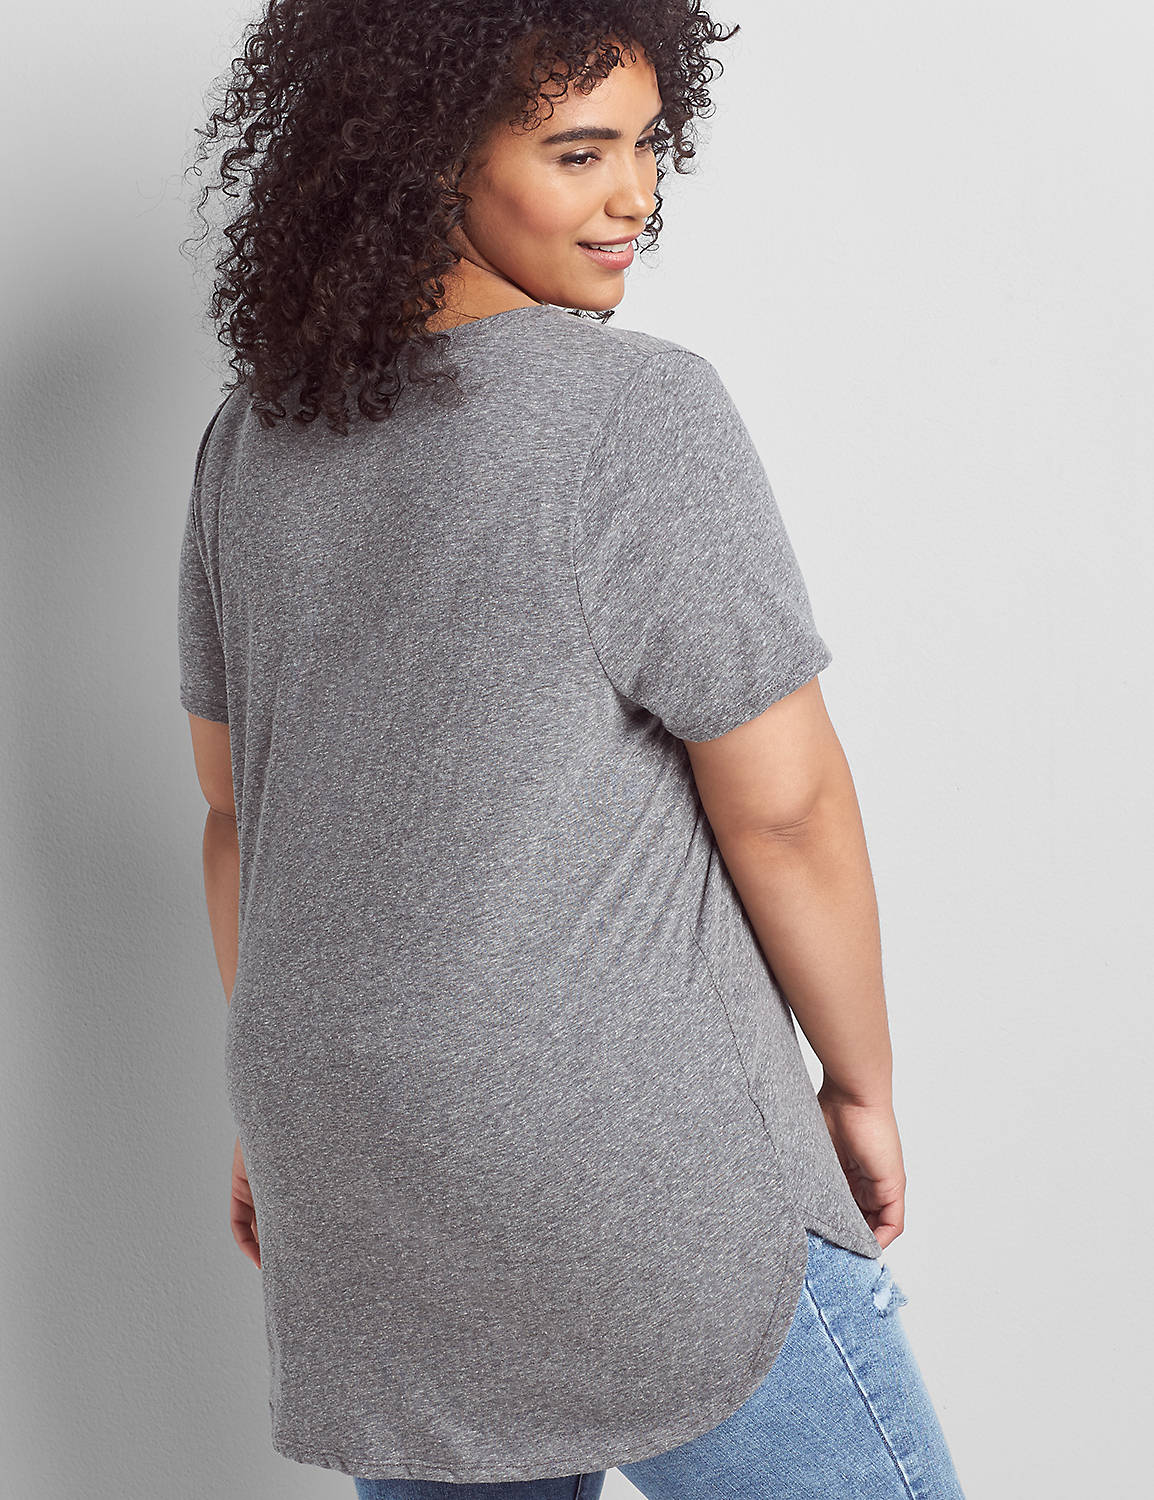 SS Crew-Neck Curved Hem HiLo Graphic: Every Size Is Beautiful 1123290:BTC30 Medium Heather Gray:14/16 Product Image 2